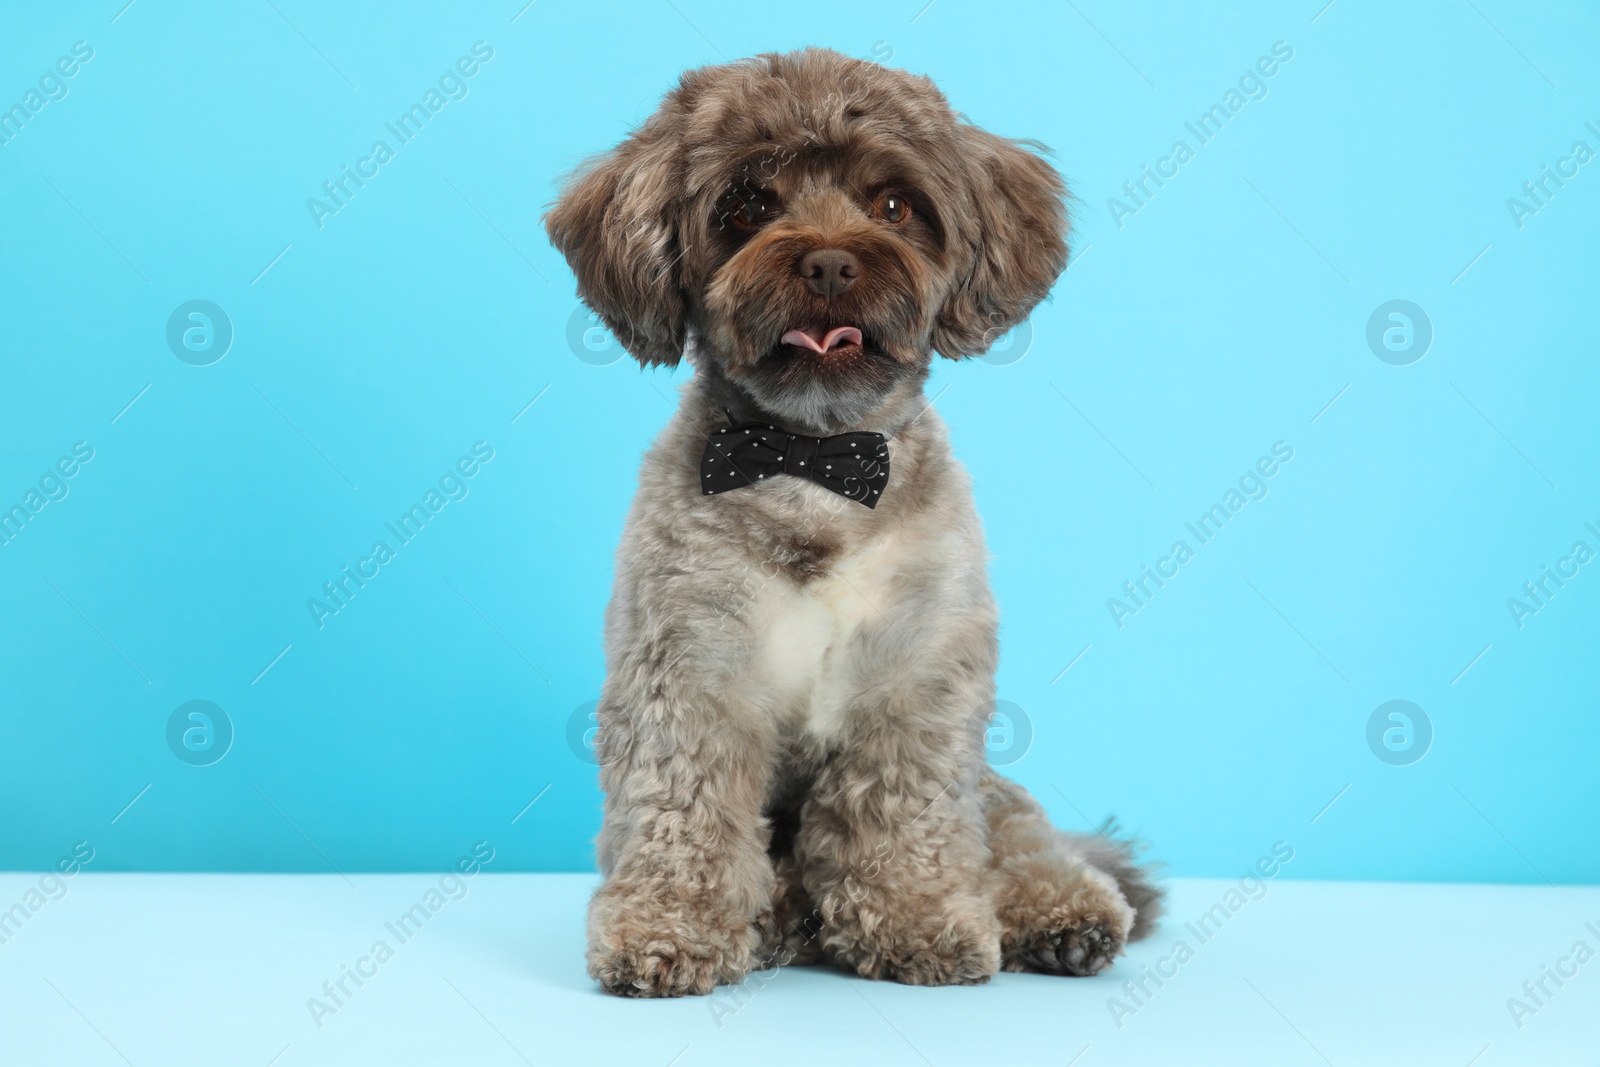 Photo of Cute Maltipoo dog with bow tie on light blue background. Lovely pet